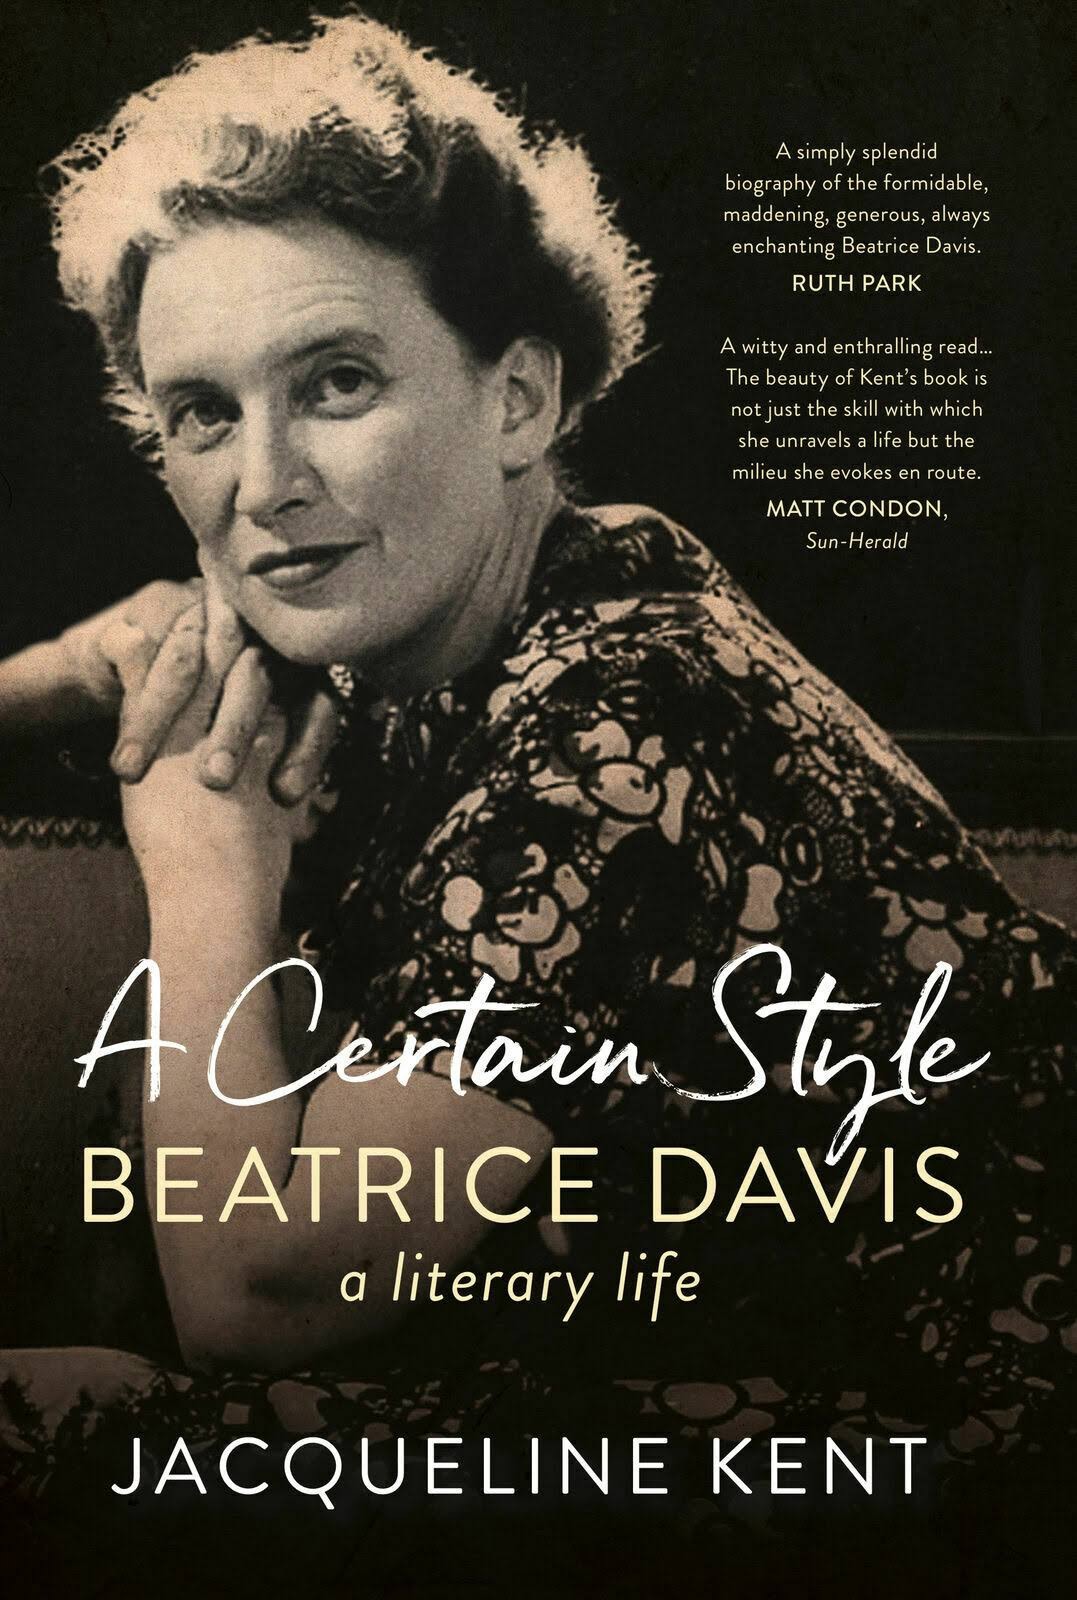 A Certain Style Beatrice Davis a literary life by Jacqueline Kent